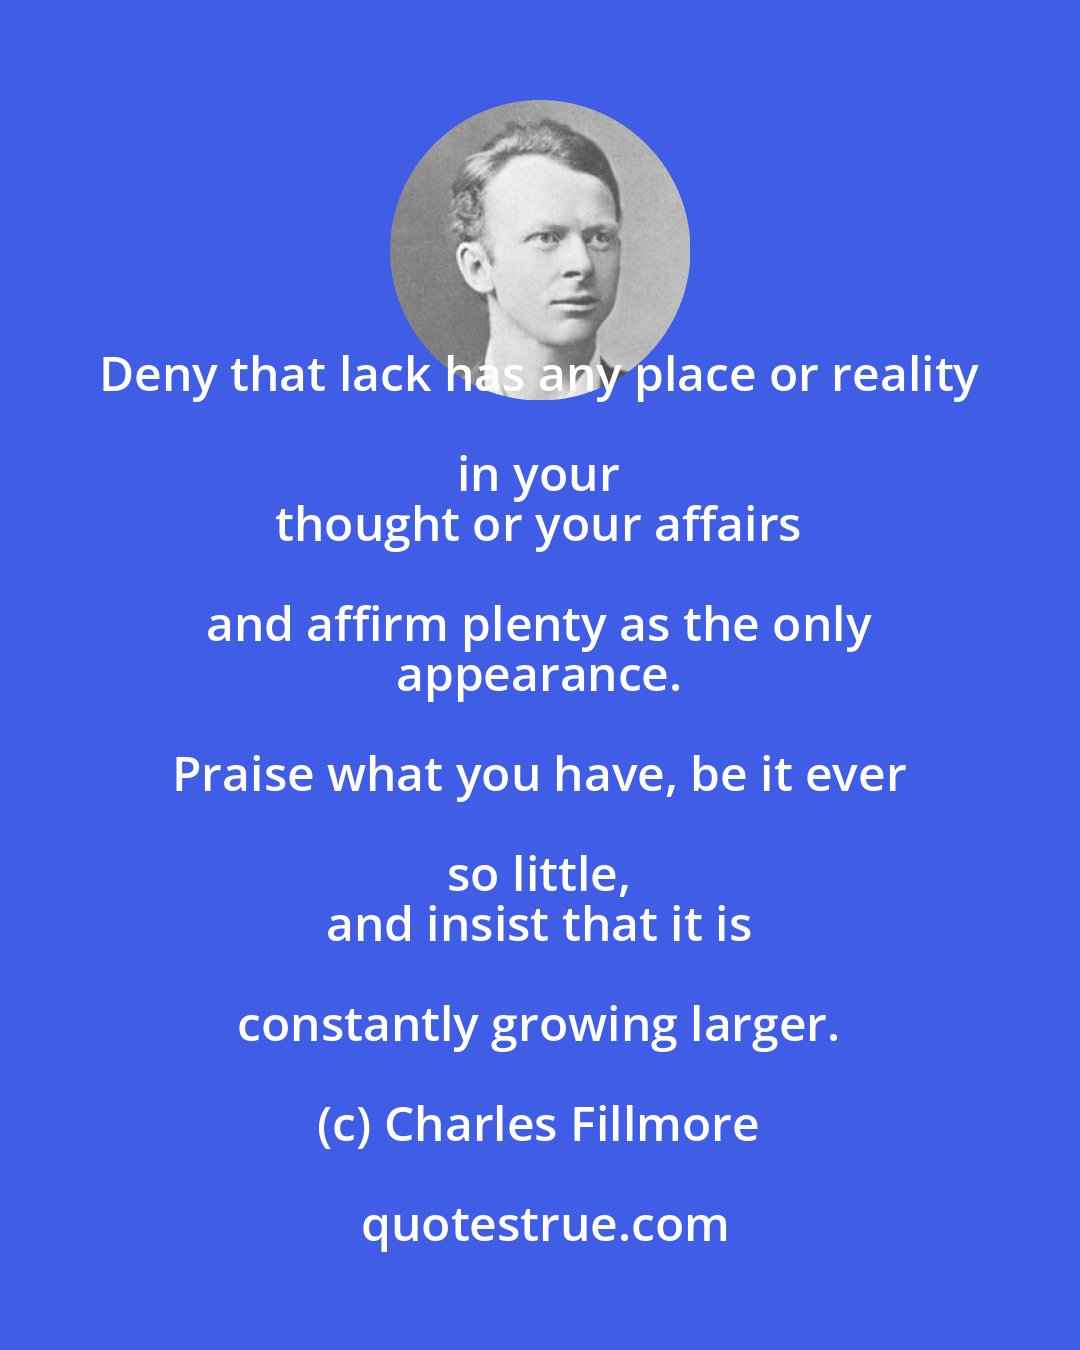 Charles Fillmore: Deny that lack has any place or reality in your 
 thought or your affairs and affirm plenty as the only 
 appearance. Praise what you have, be it ever so little, 
 and insist that it is constantly growing larger.